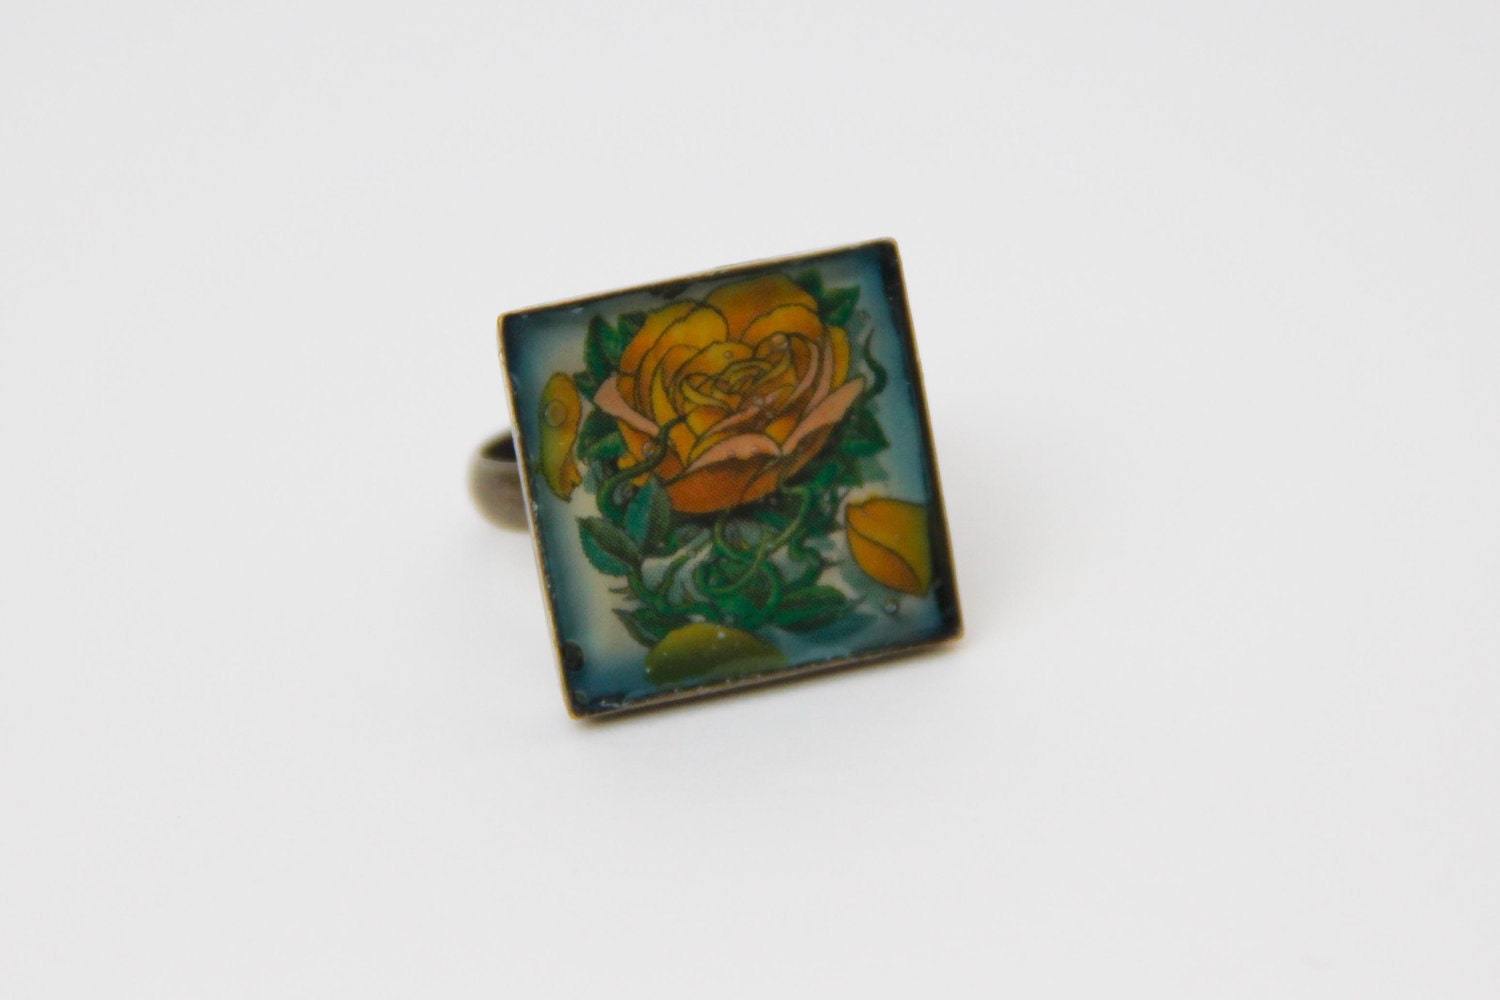 This is a tattooed ring He has a nice old school rose image on it the ring